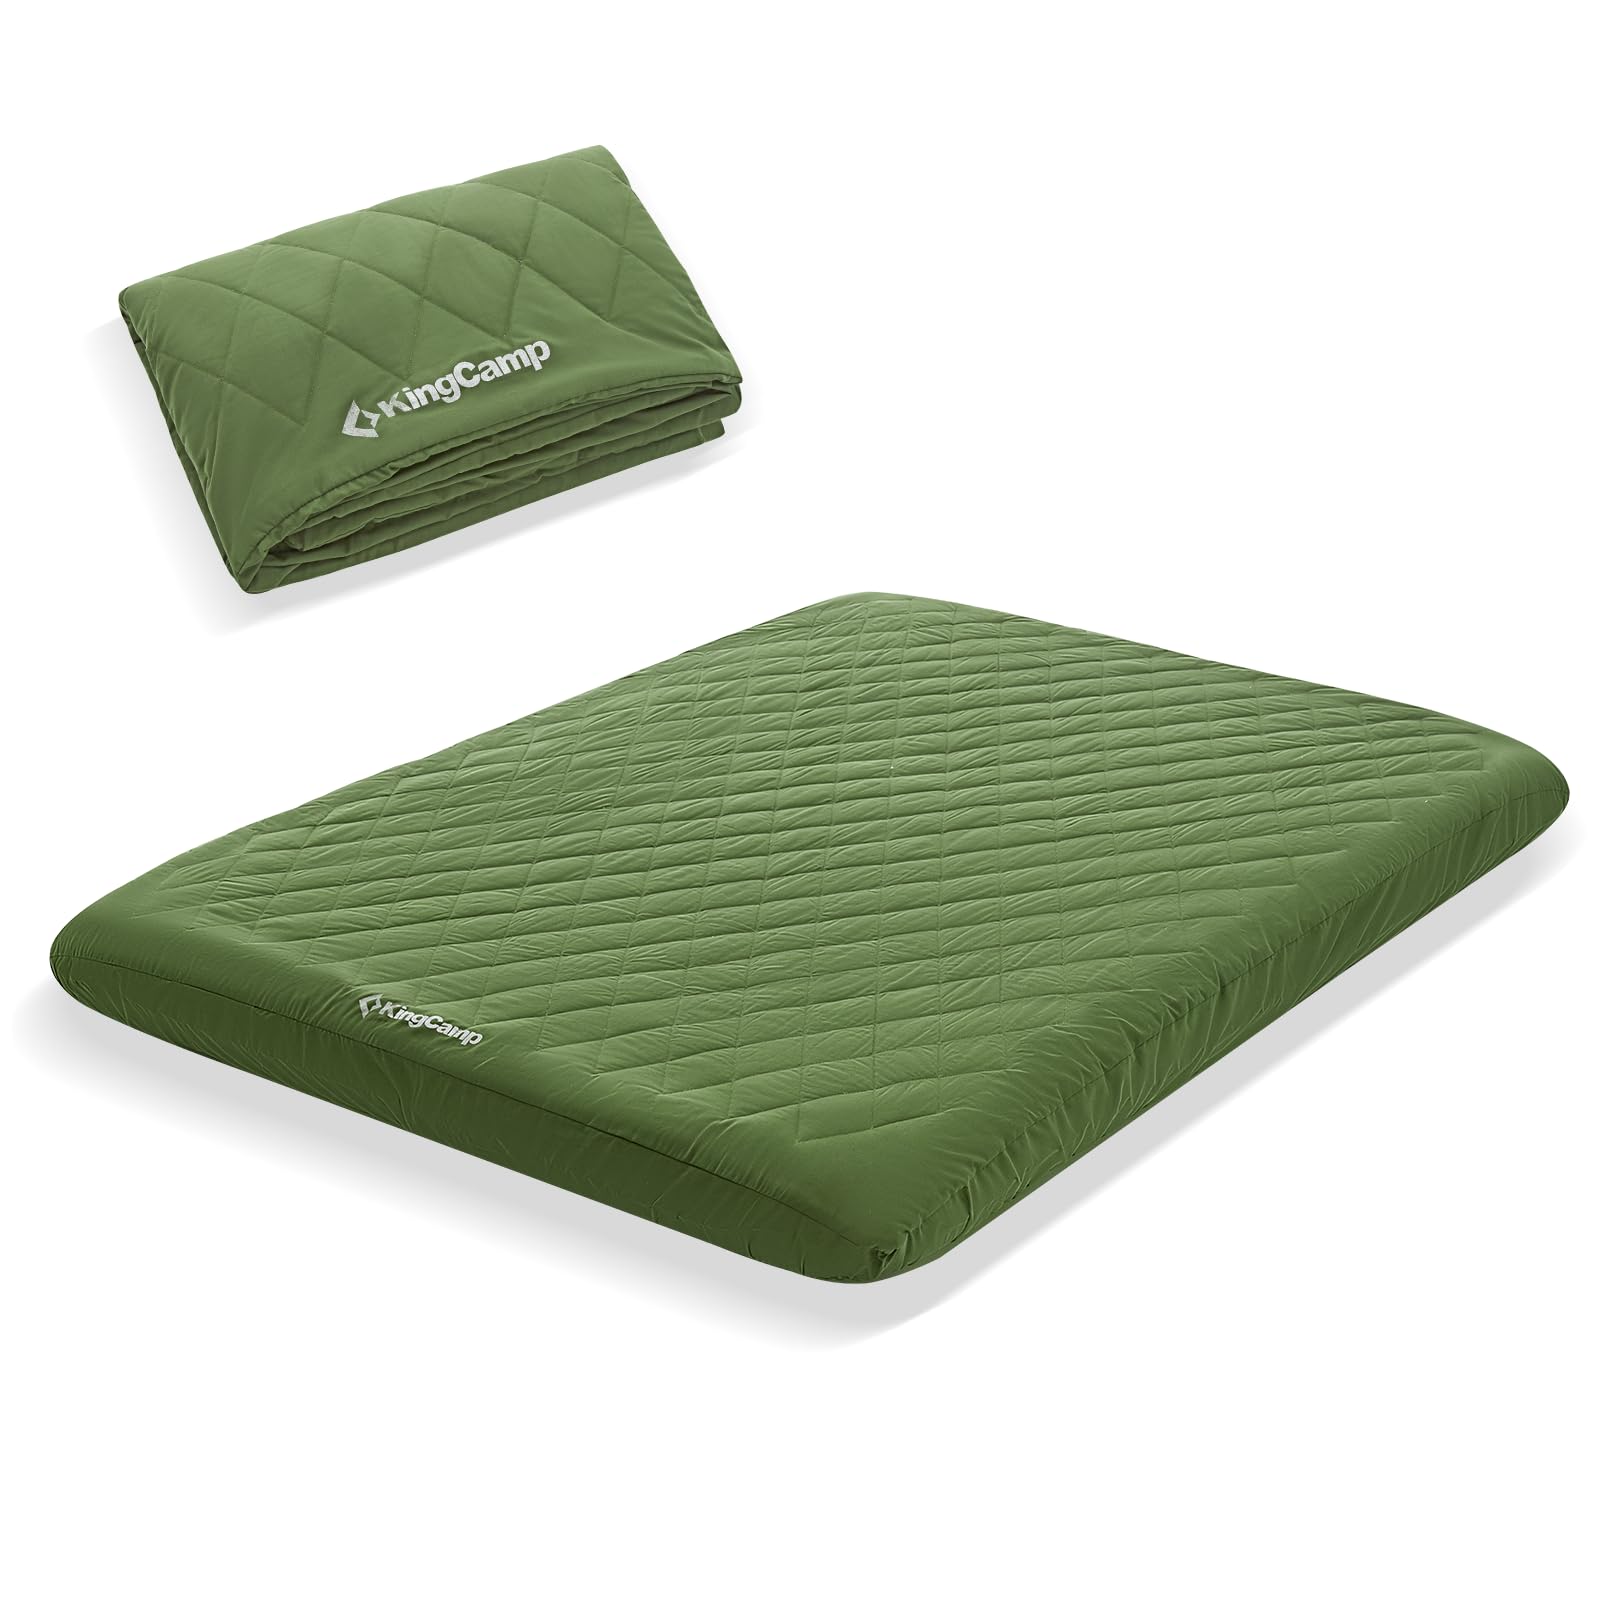 KingCamp double person mat cover